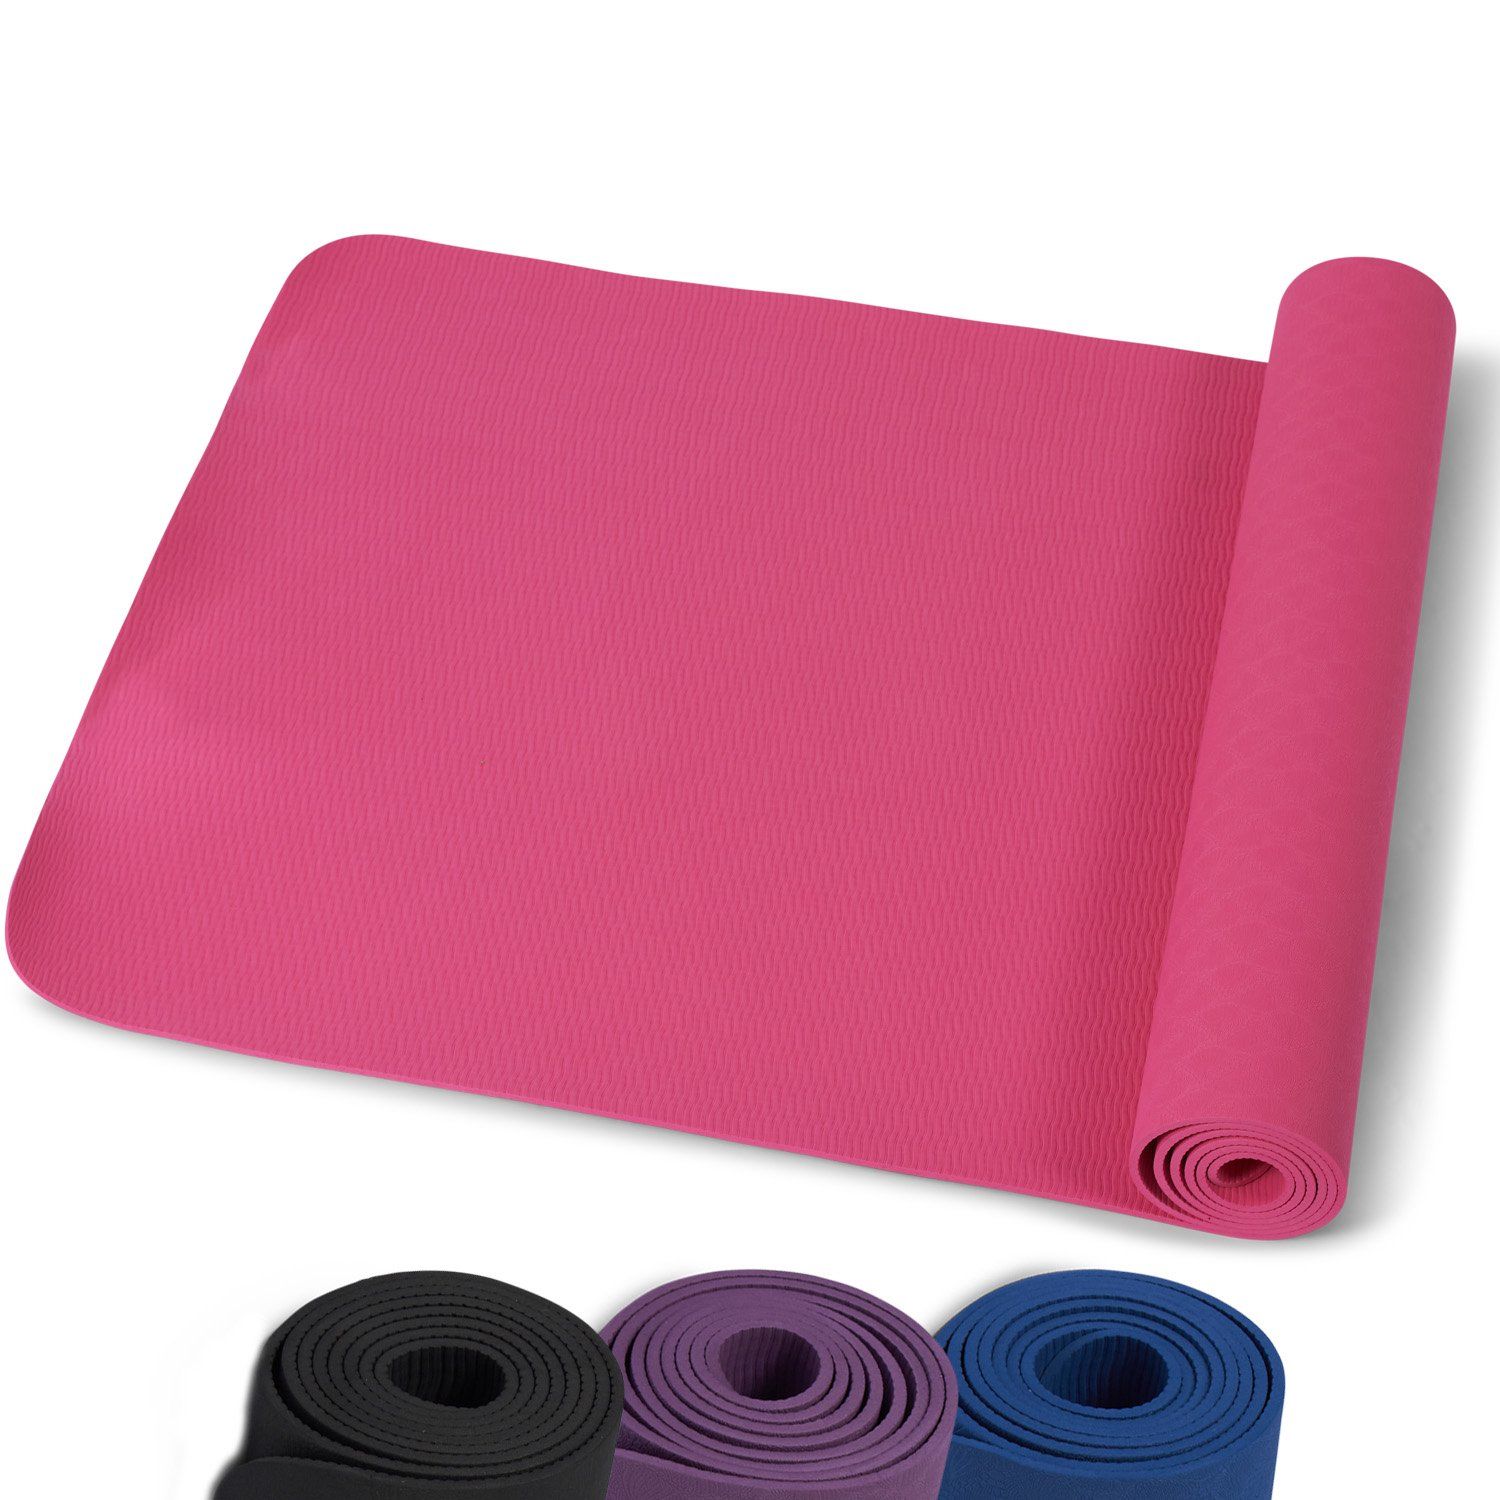 gladiator sports yoga mat pink different colors